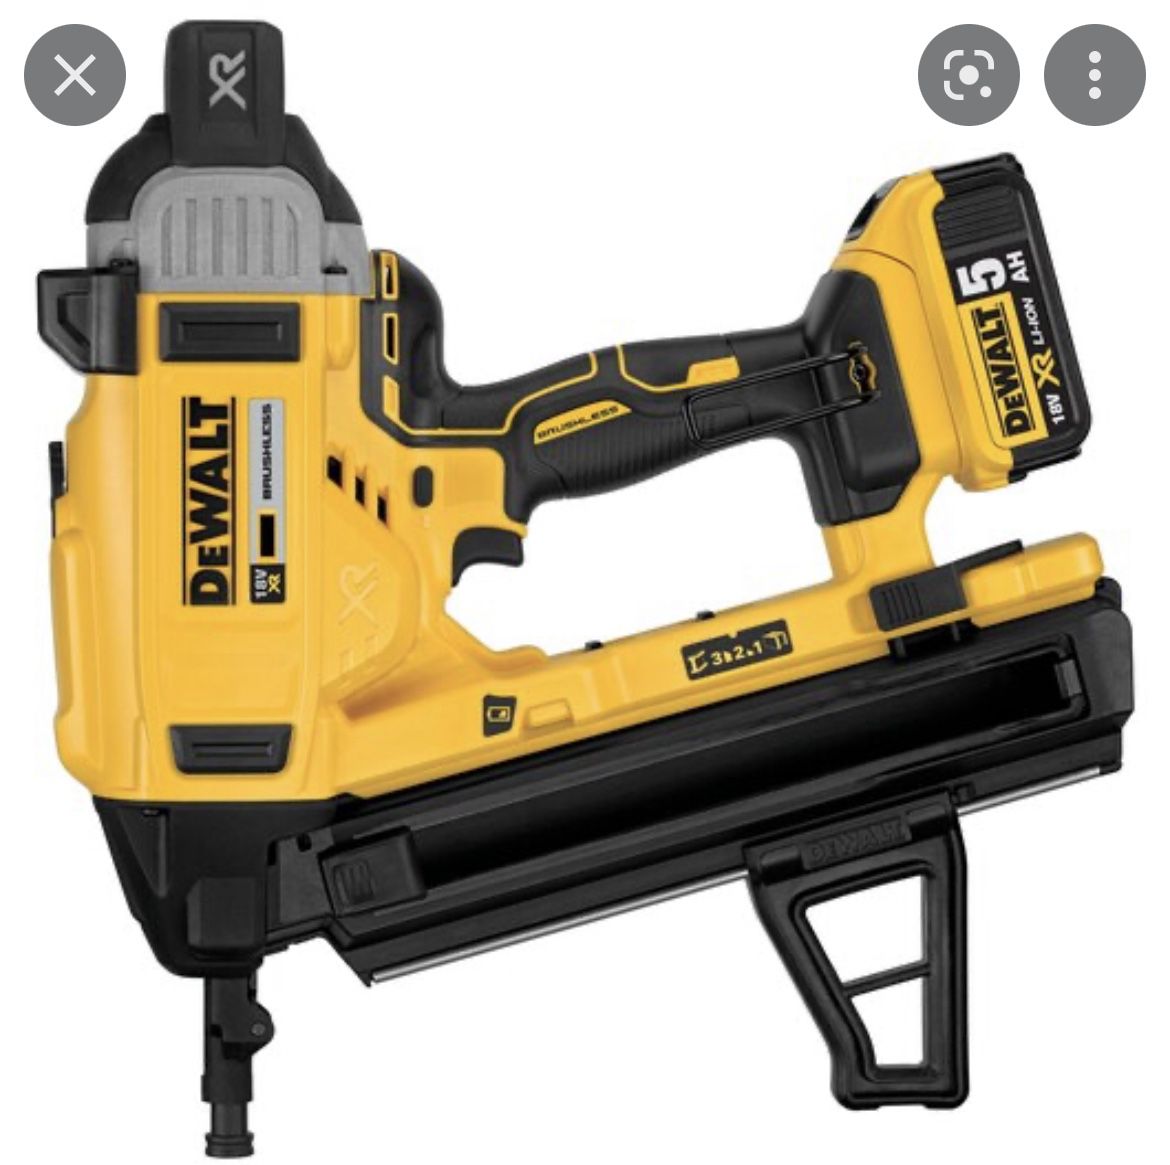 Dewalt Concrete Nail Gun Comes With Battery And Case Missing Charger 